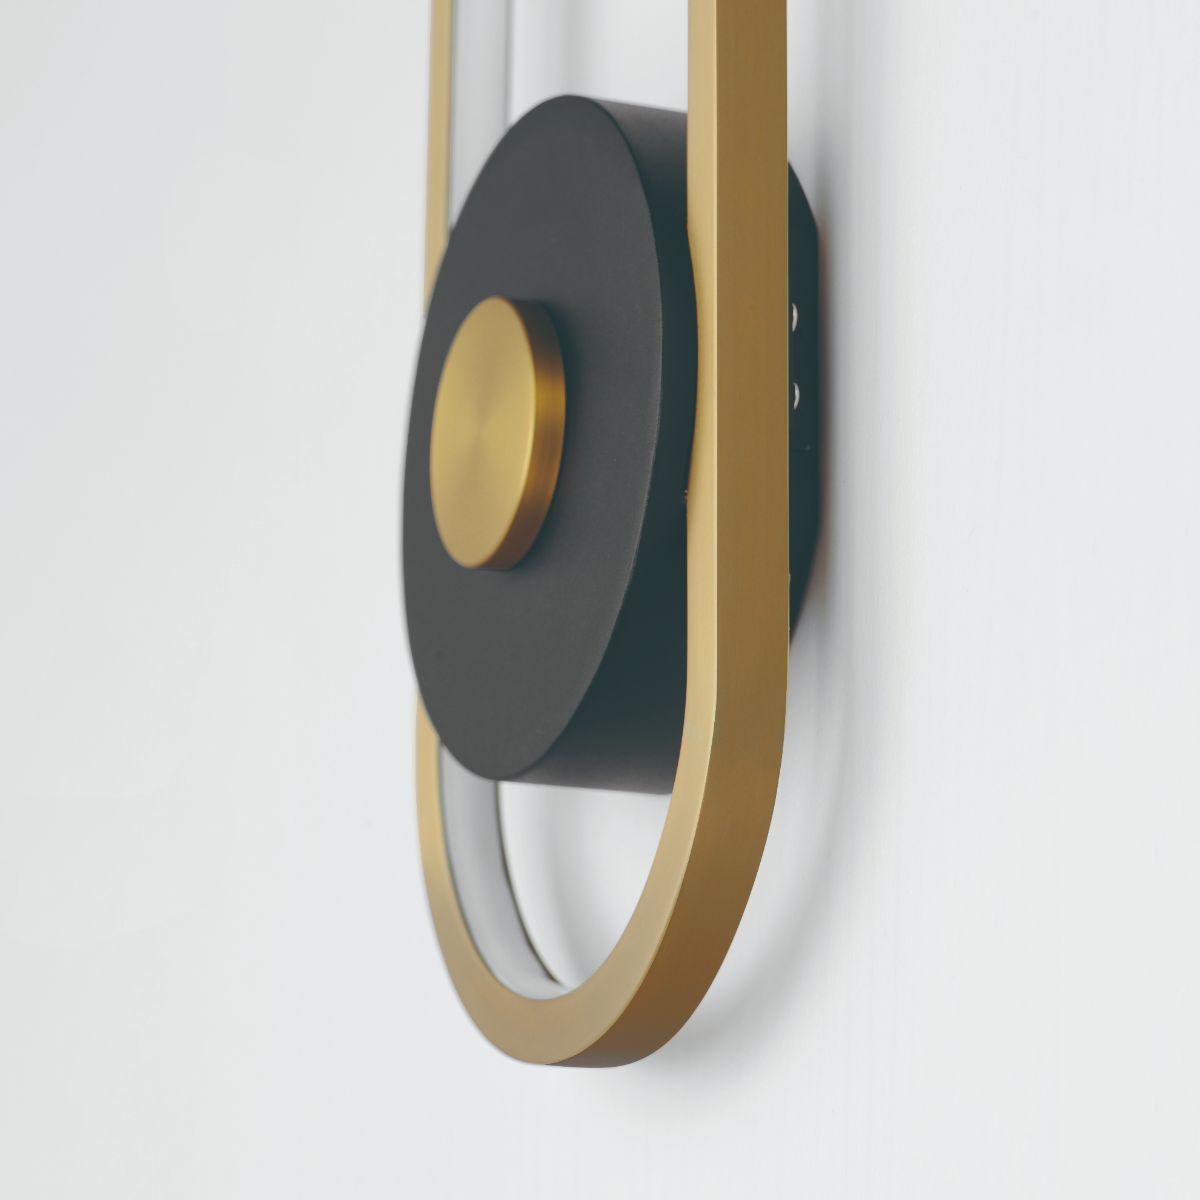 Gravity 18 in. LED Outdoor Wall Sconce 3000K Black & Gold Finish